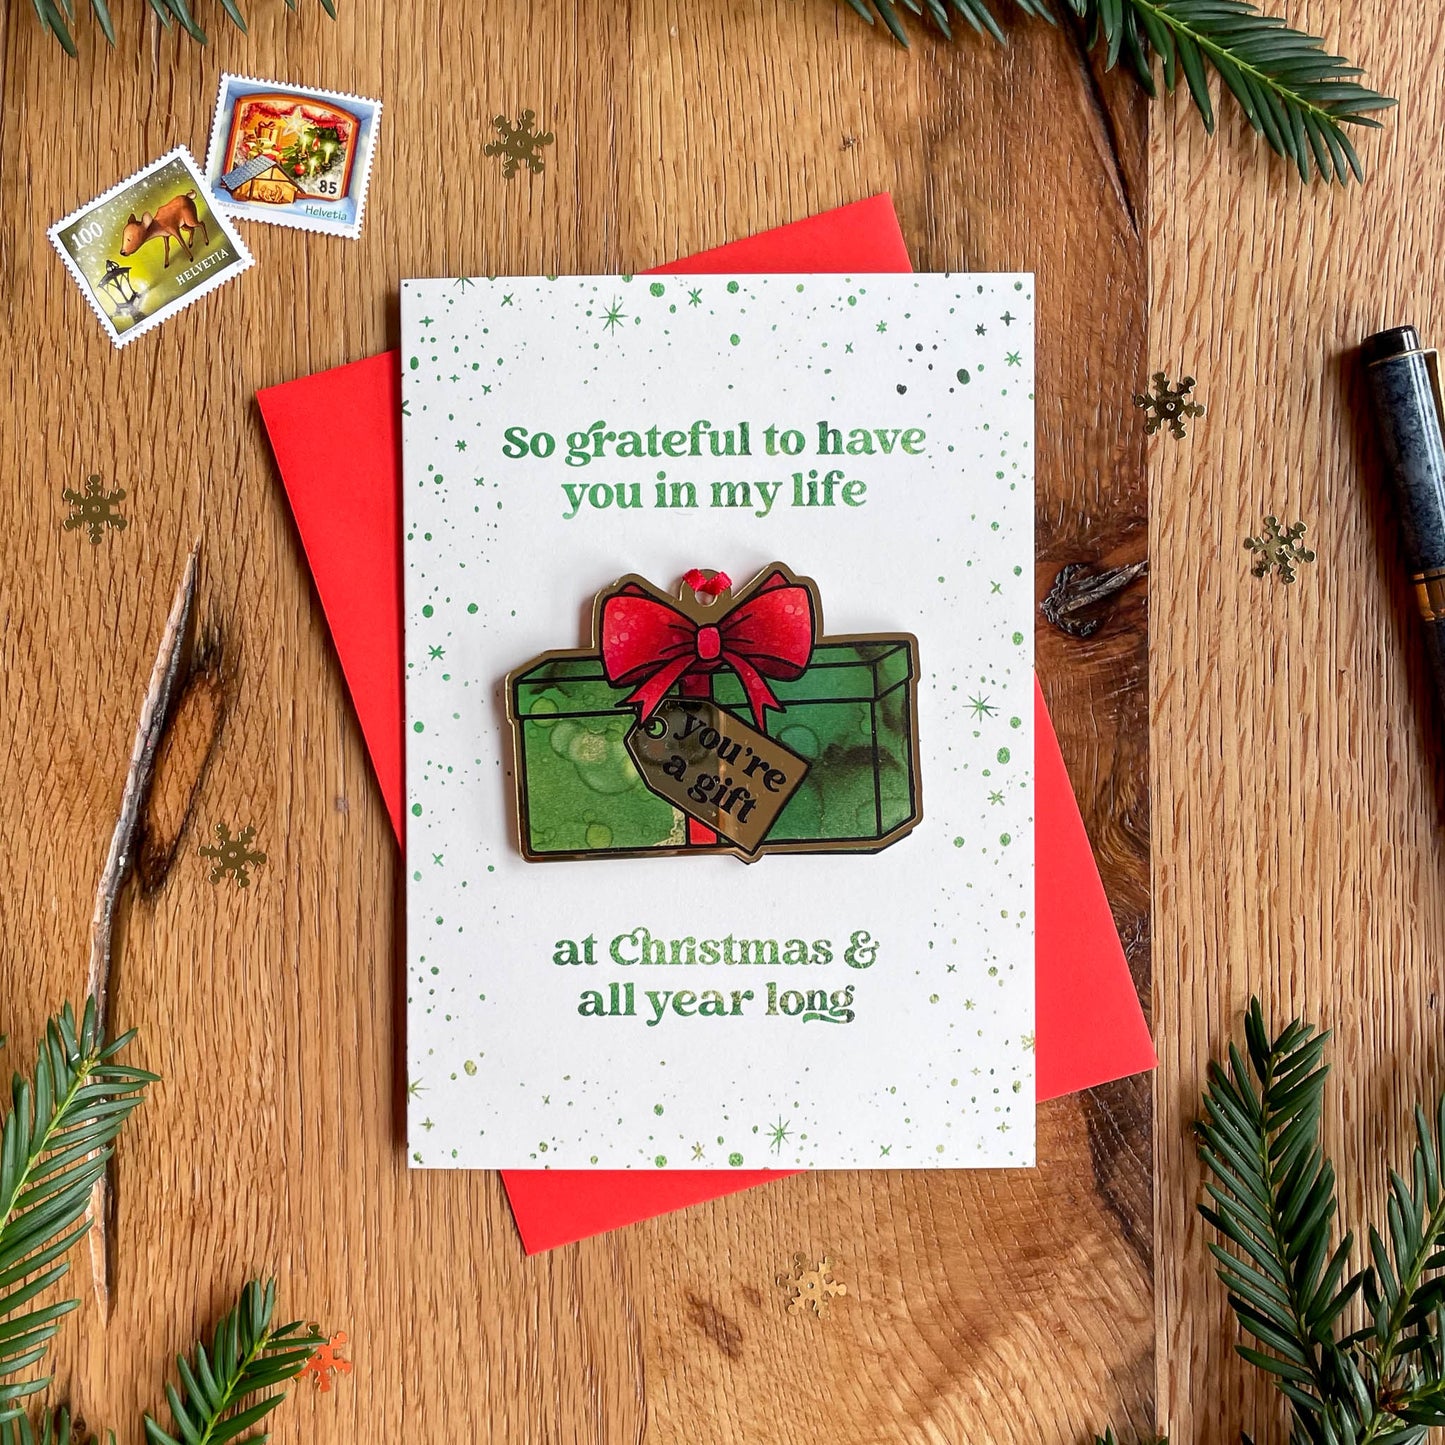 "You're a Gift" Detachable Tree Decoration & Greeting Card